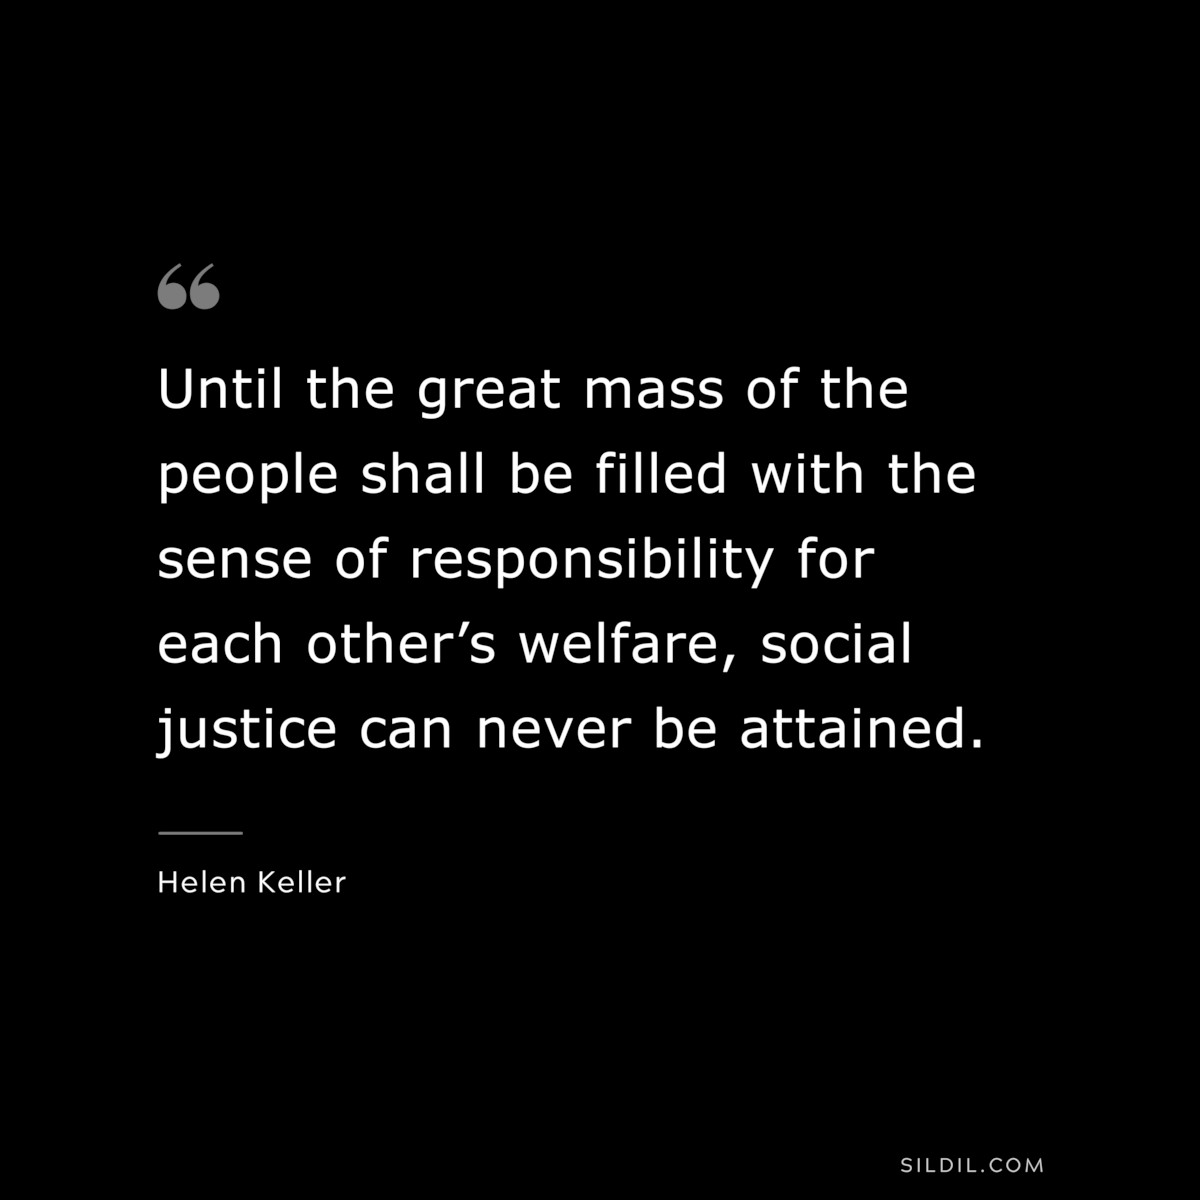 Until the great mass of the people shall be filled with the sense of responsibility for each other’s welfare, social justice can never be attained. ― Helen Keller